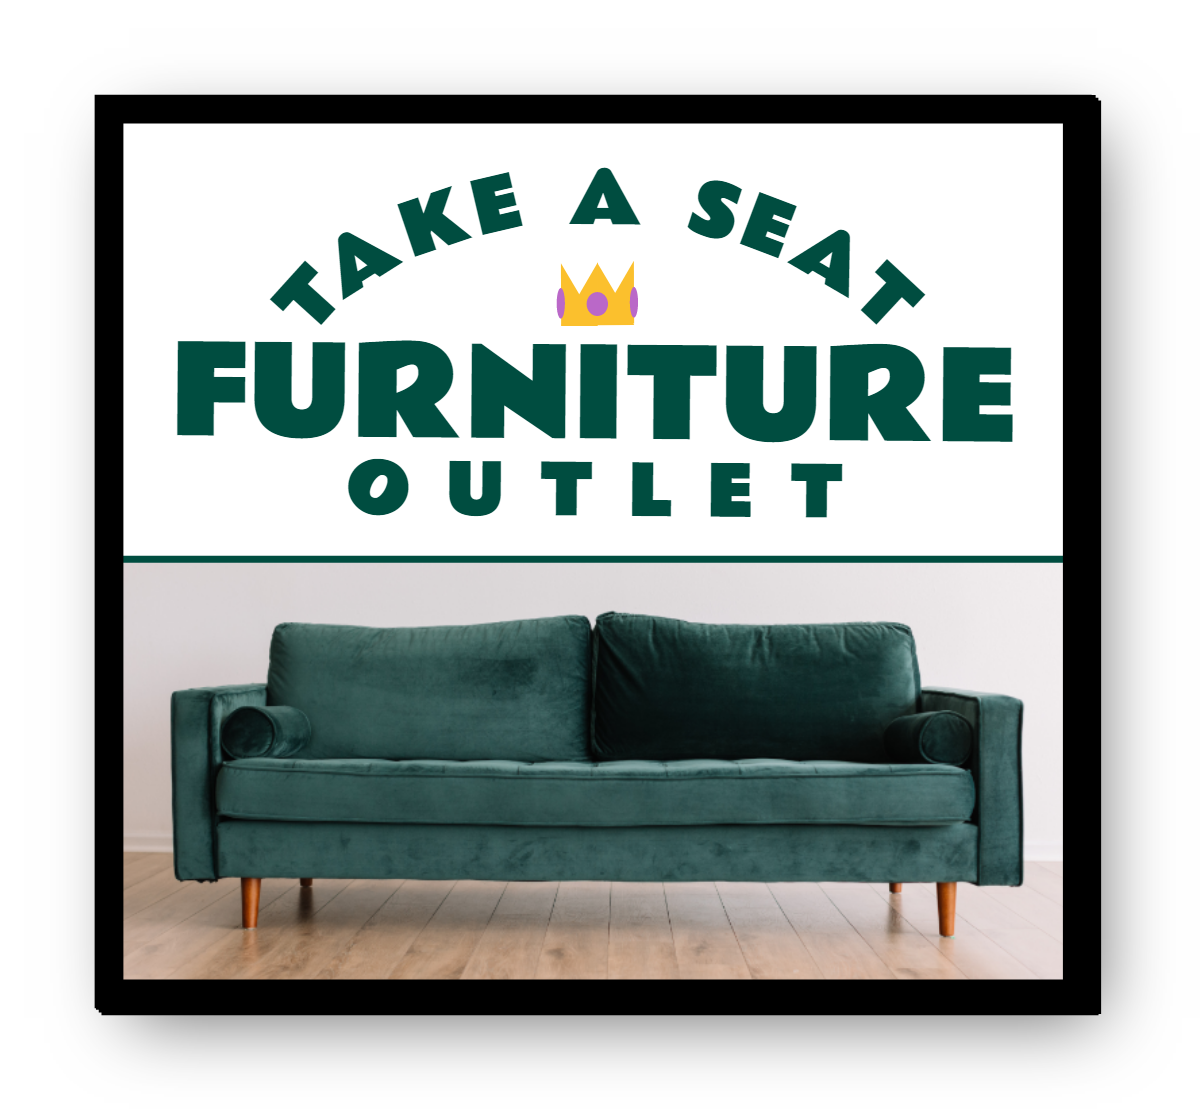 Take A Seat Furniture Outlet Single Faced Lit Cabinet Sign